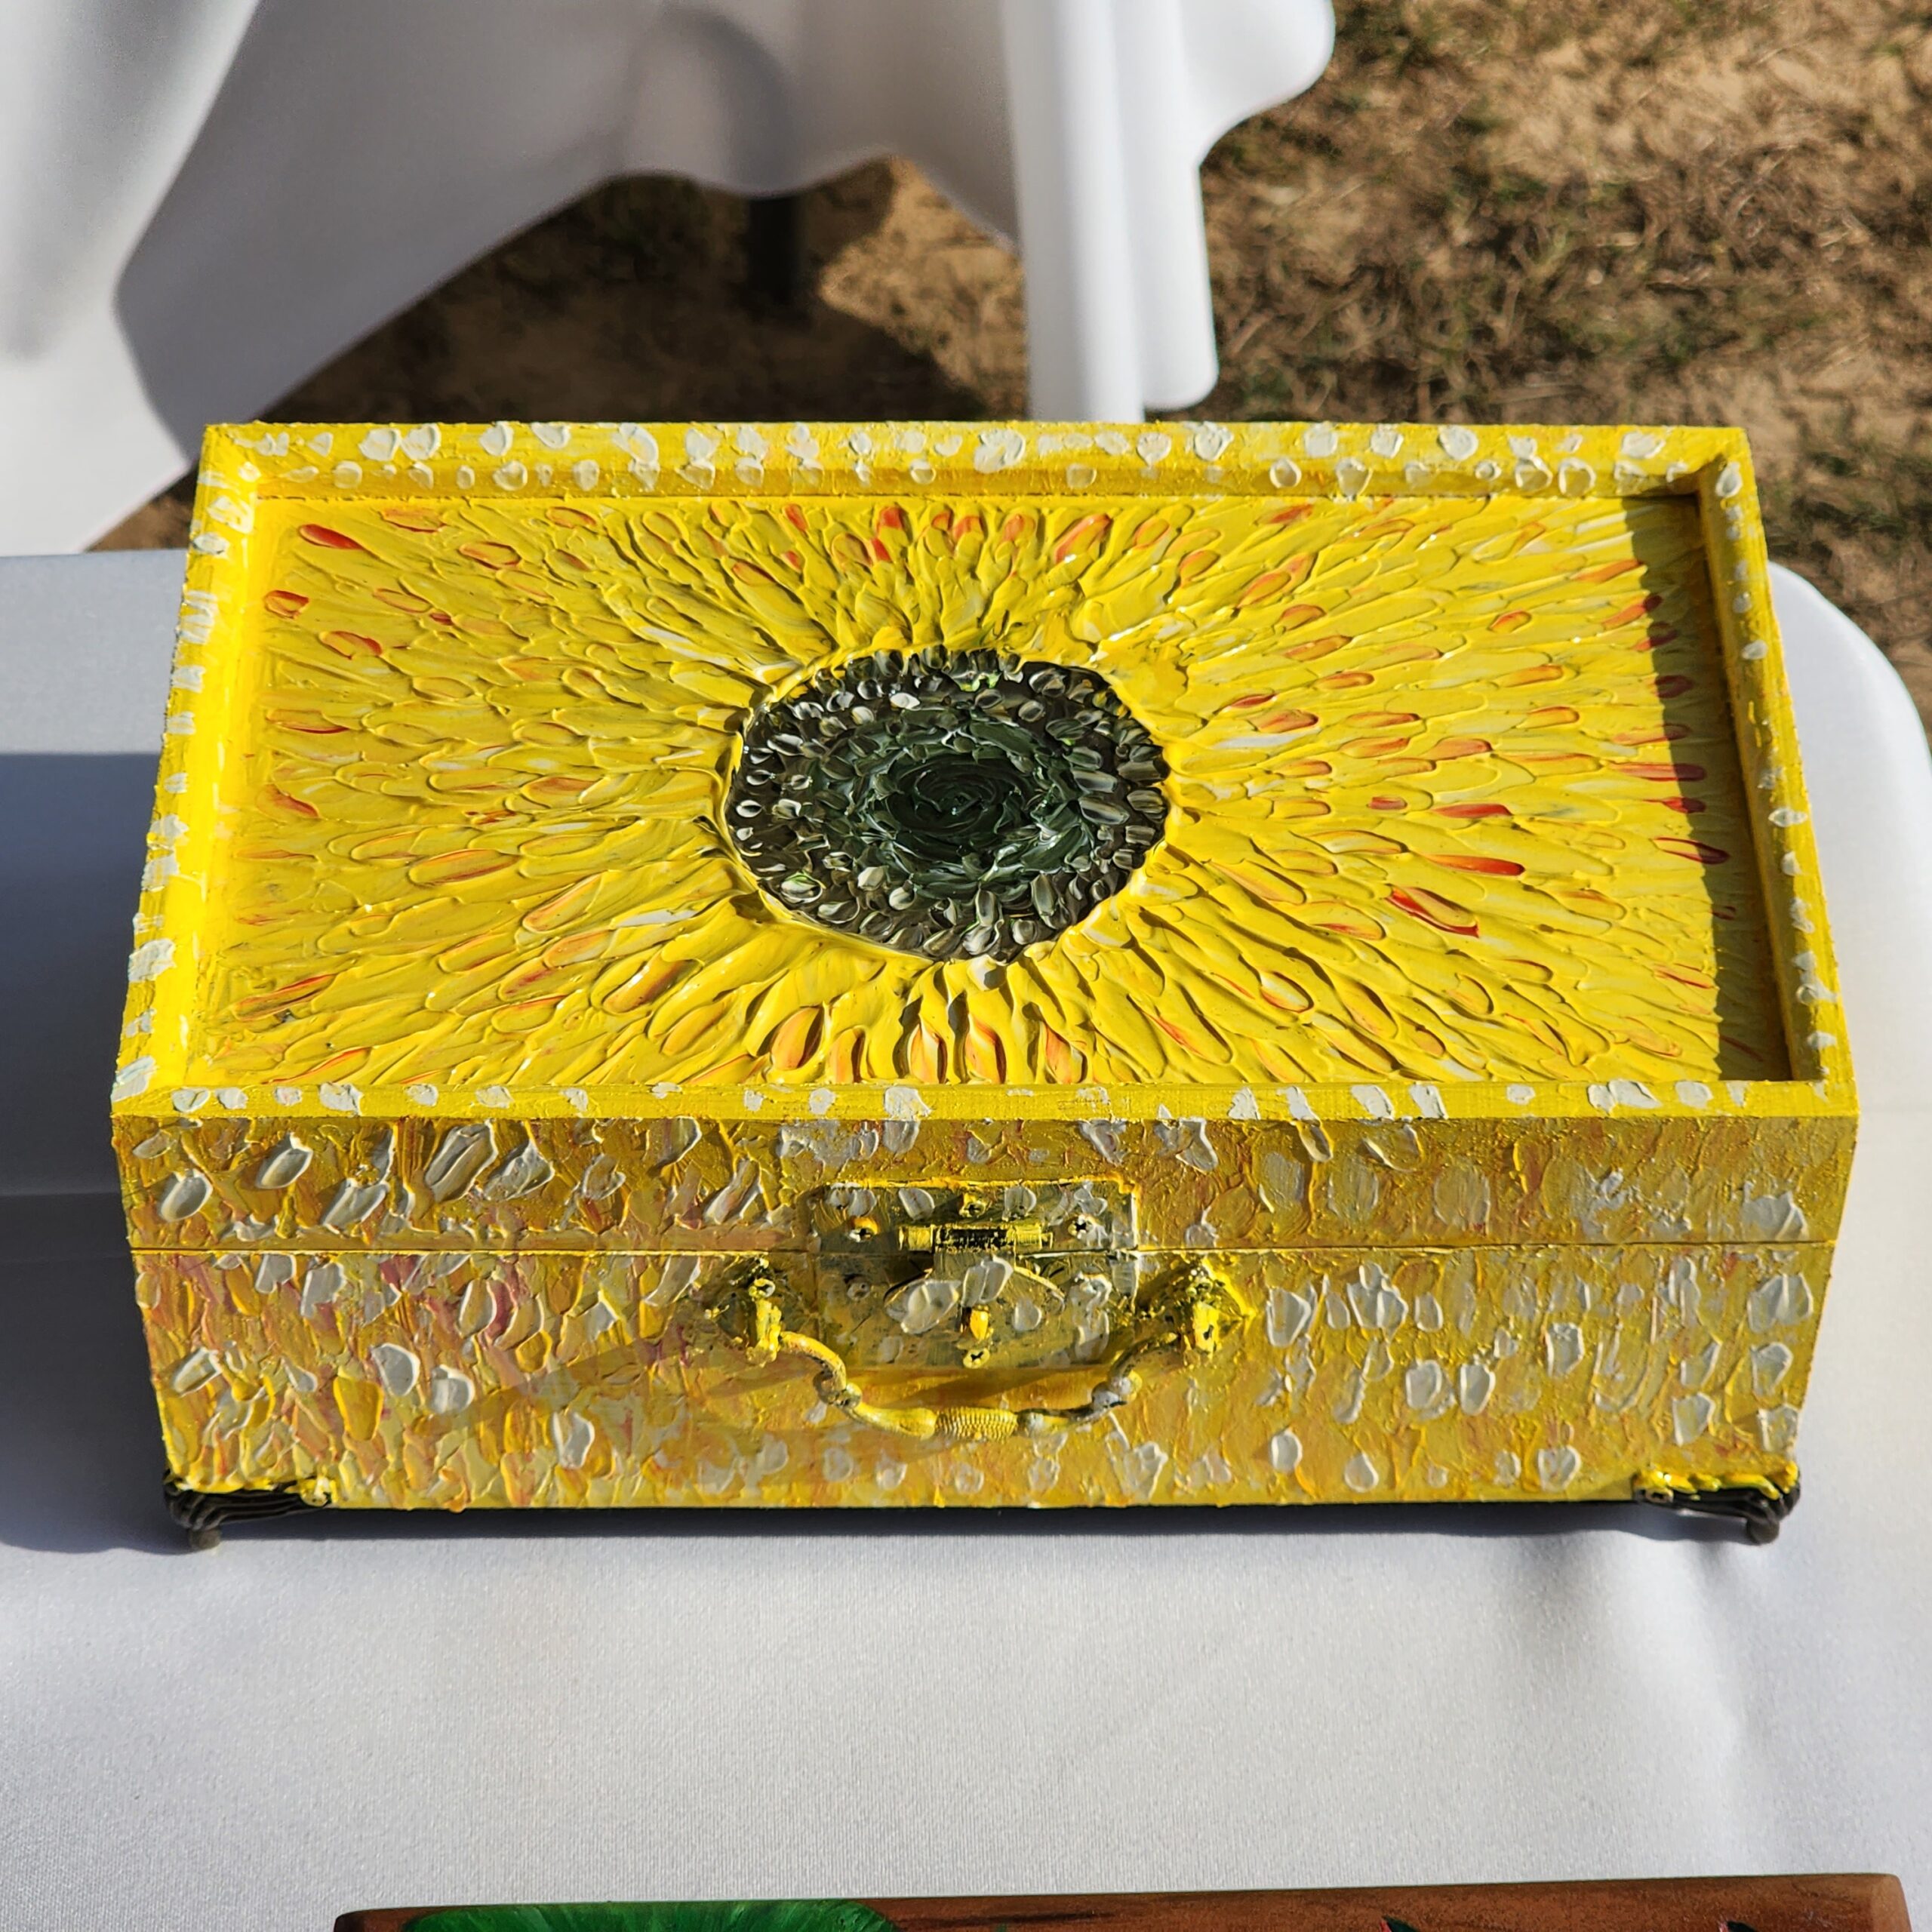 Beautiful handpainted wooden trinket box with a mirror. This cute texturized sunflower trinket box is an ideal gift for a special loved one. You can store jewelry such as rings, necklaces, bracelets, or anything you would like to keep in a particular place, especially in this elegant and artistic trinket box.